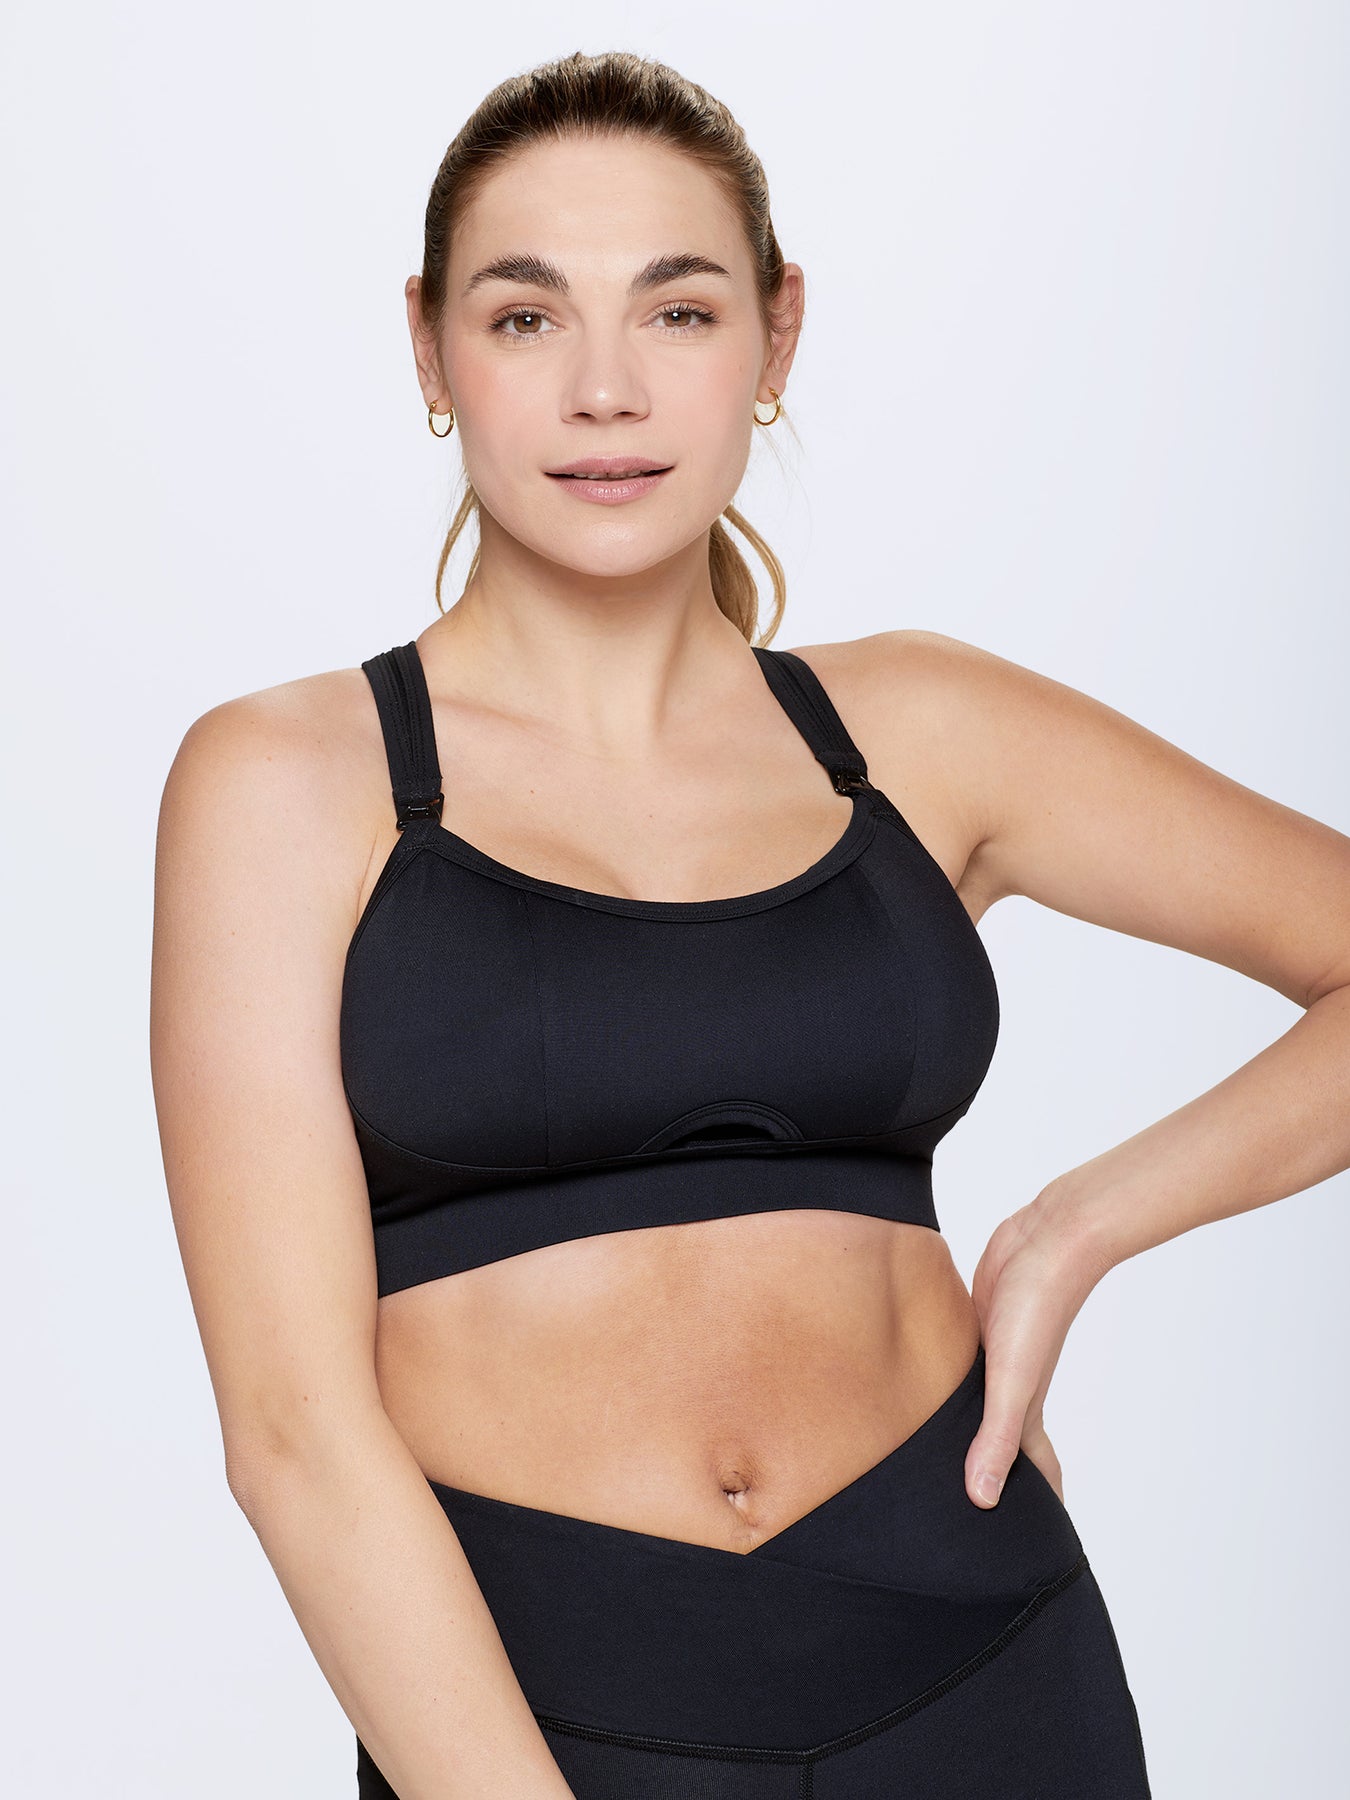 Sports Bras in large cup sizes  Sports bra, Plus size workout